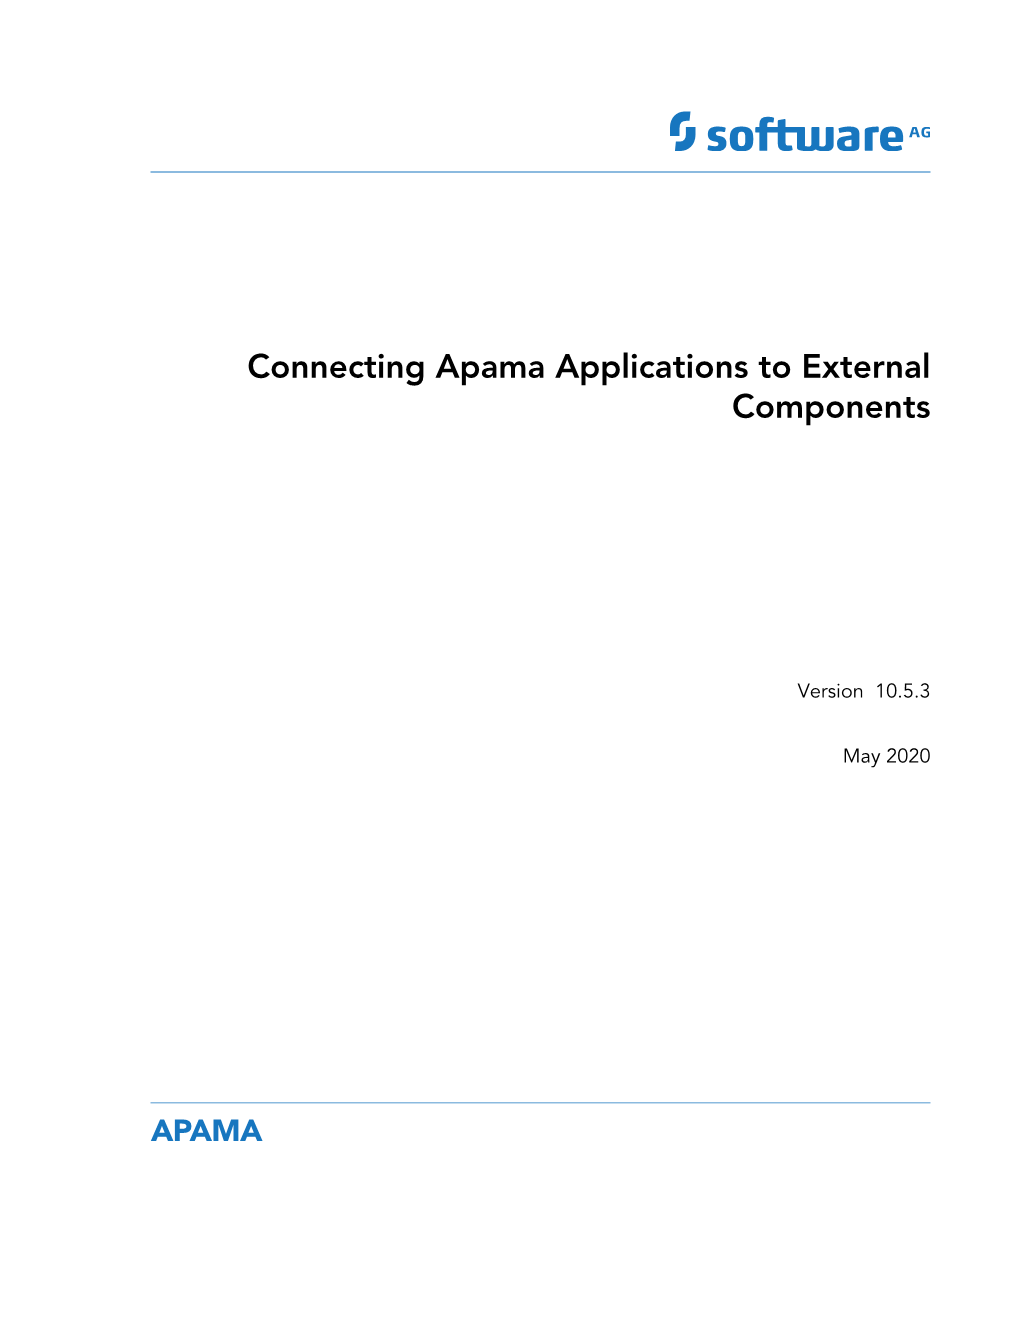 Connecting Apama Applications to External Components